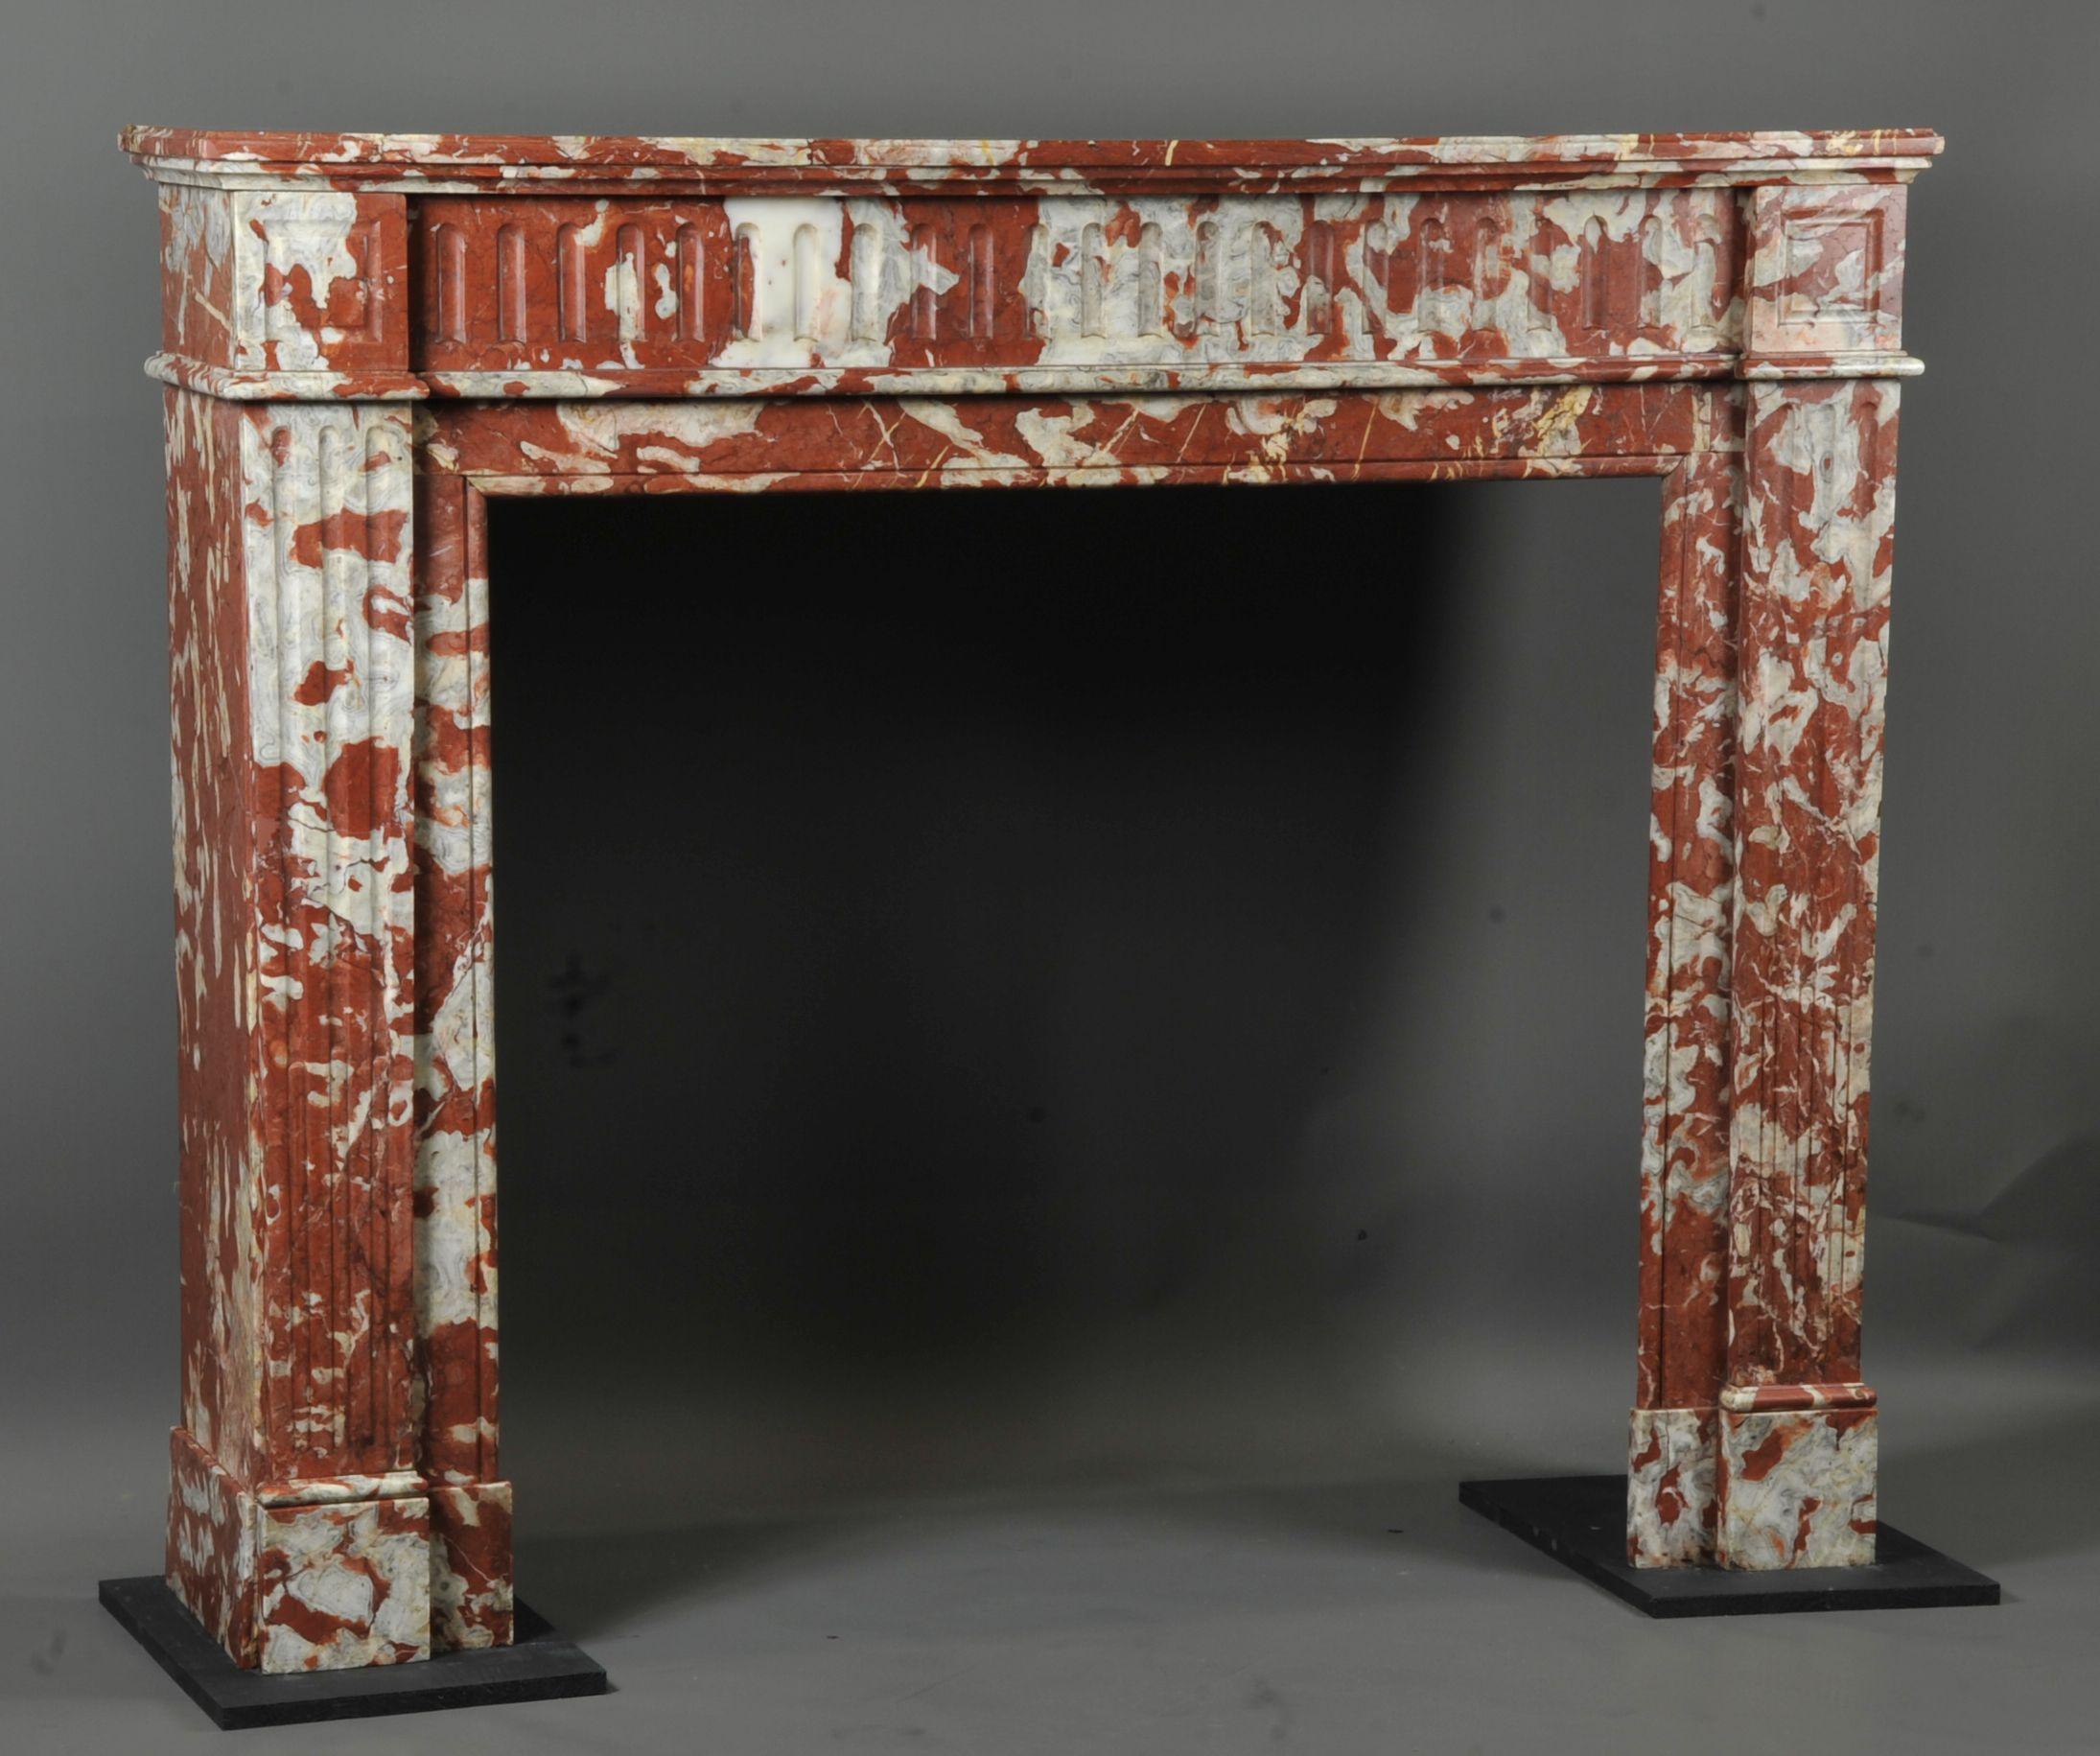 Beautiful Louis XVI style fireplace in red Languedoc marble with sheathed legs decorated with rudent grooves, lintel with large grooves and square spandrels, the whole topped with a thick tablet with multiple mouldings.

Superbe